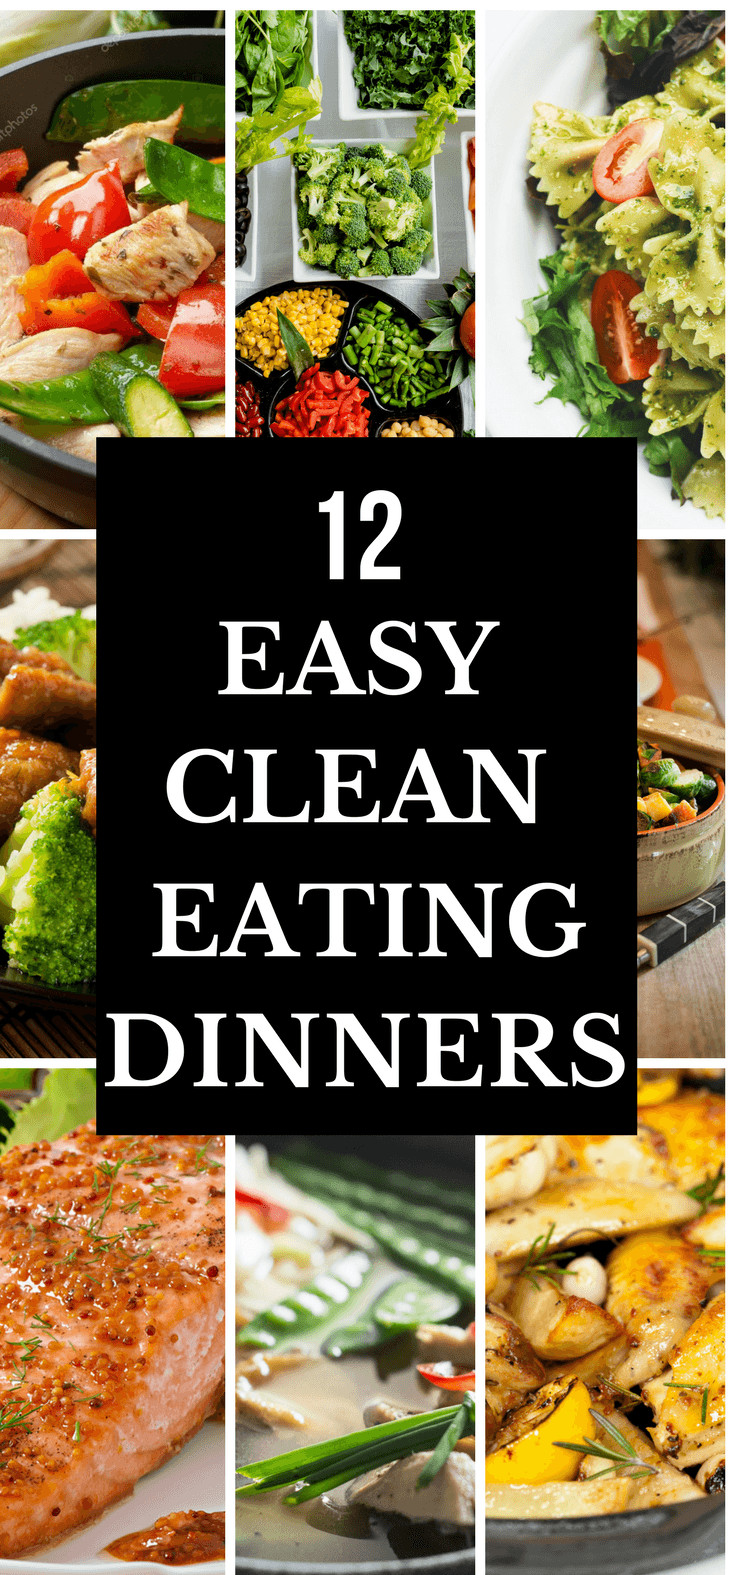 Easy Clean Eating Dinners
 12 Easy Clean Eating Dinner Recipes Ready To Eat In 30 Minutes